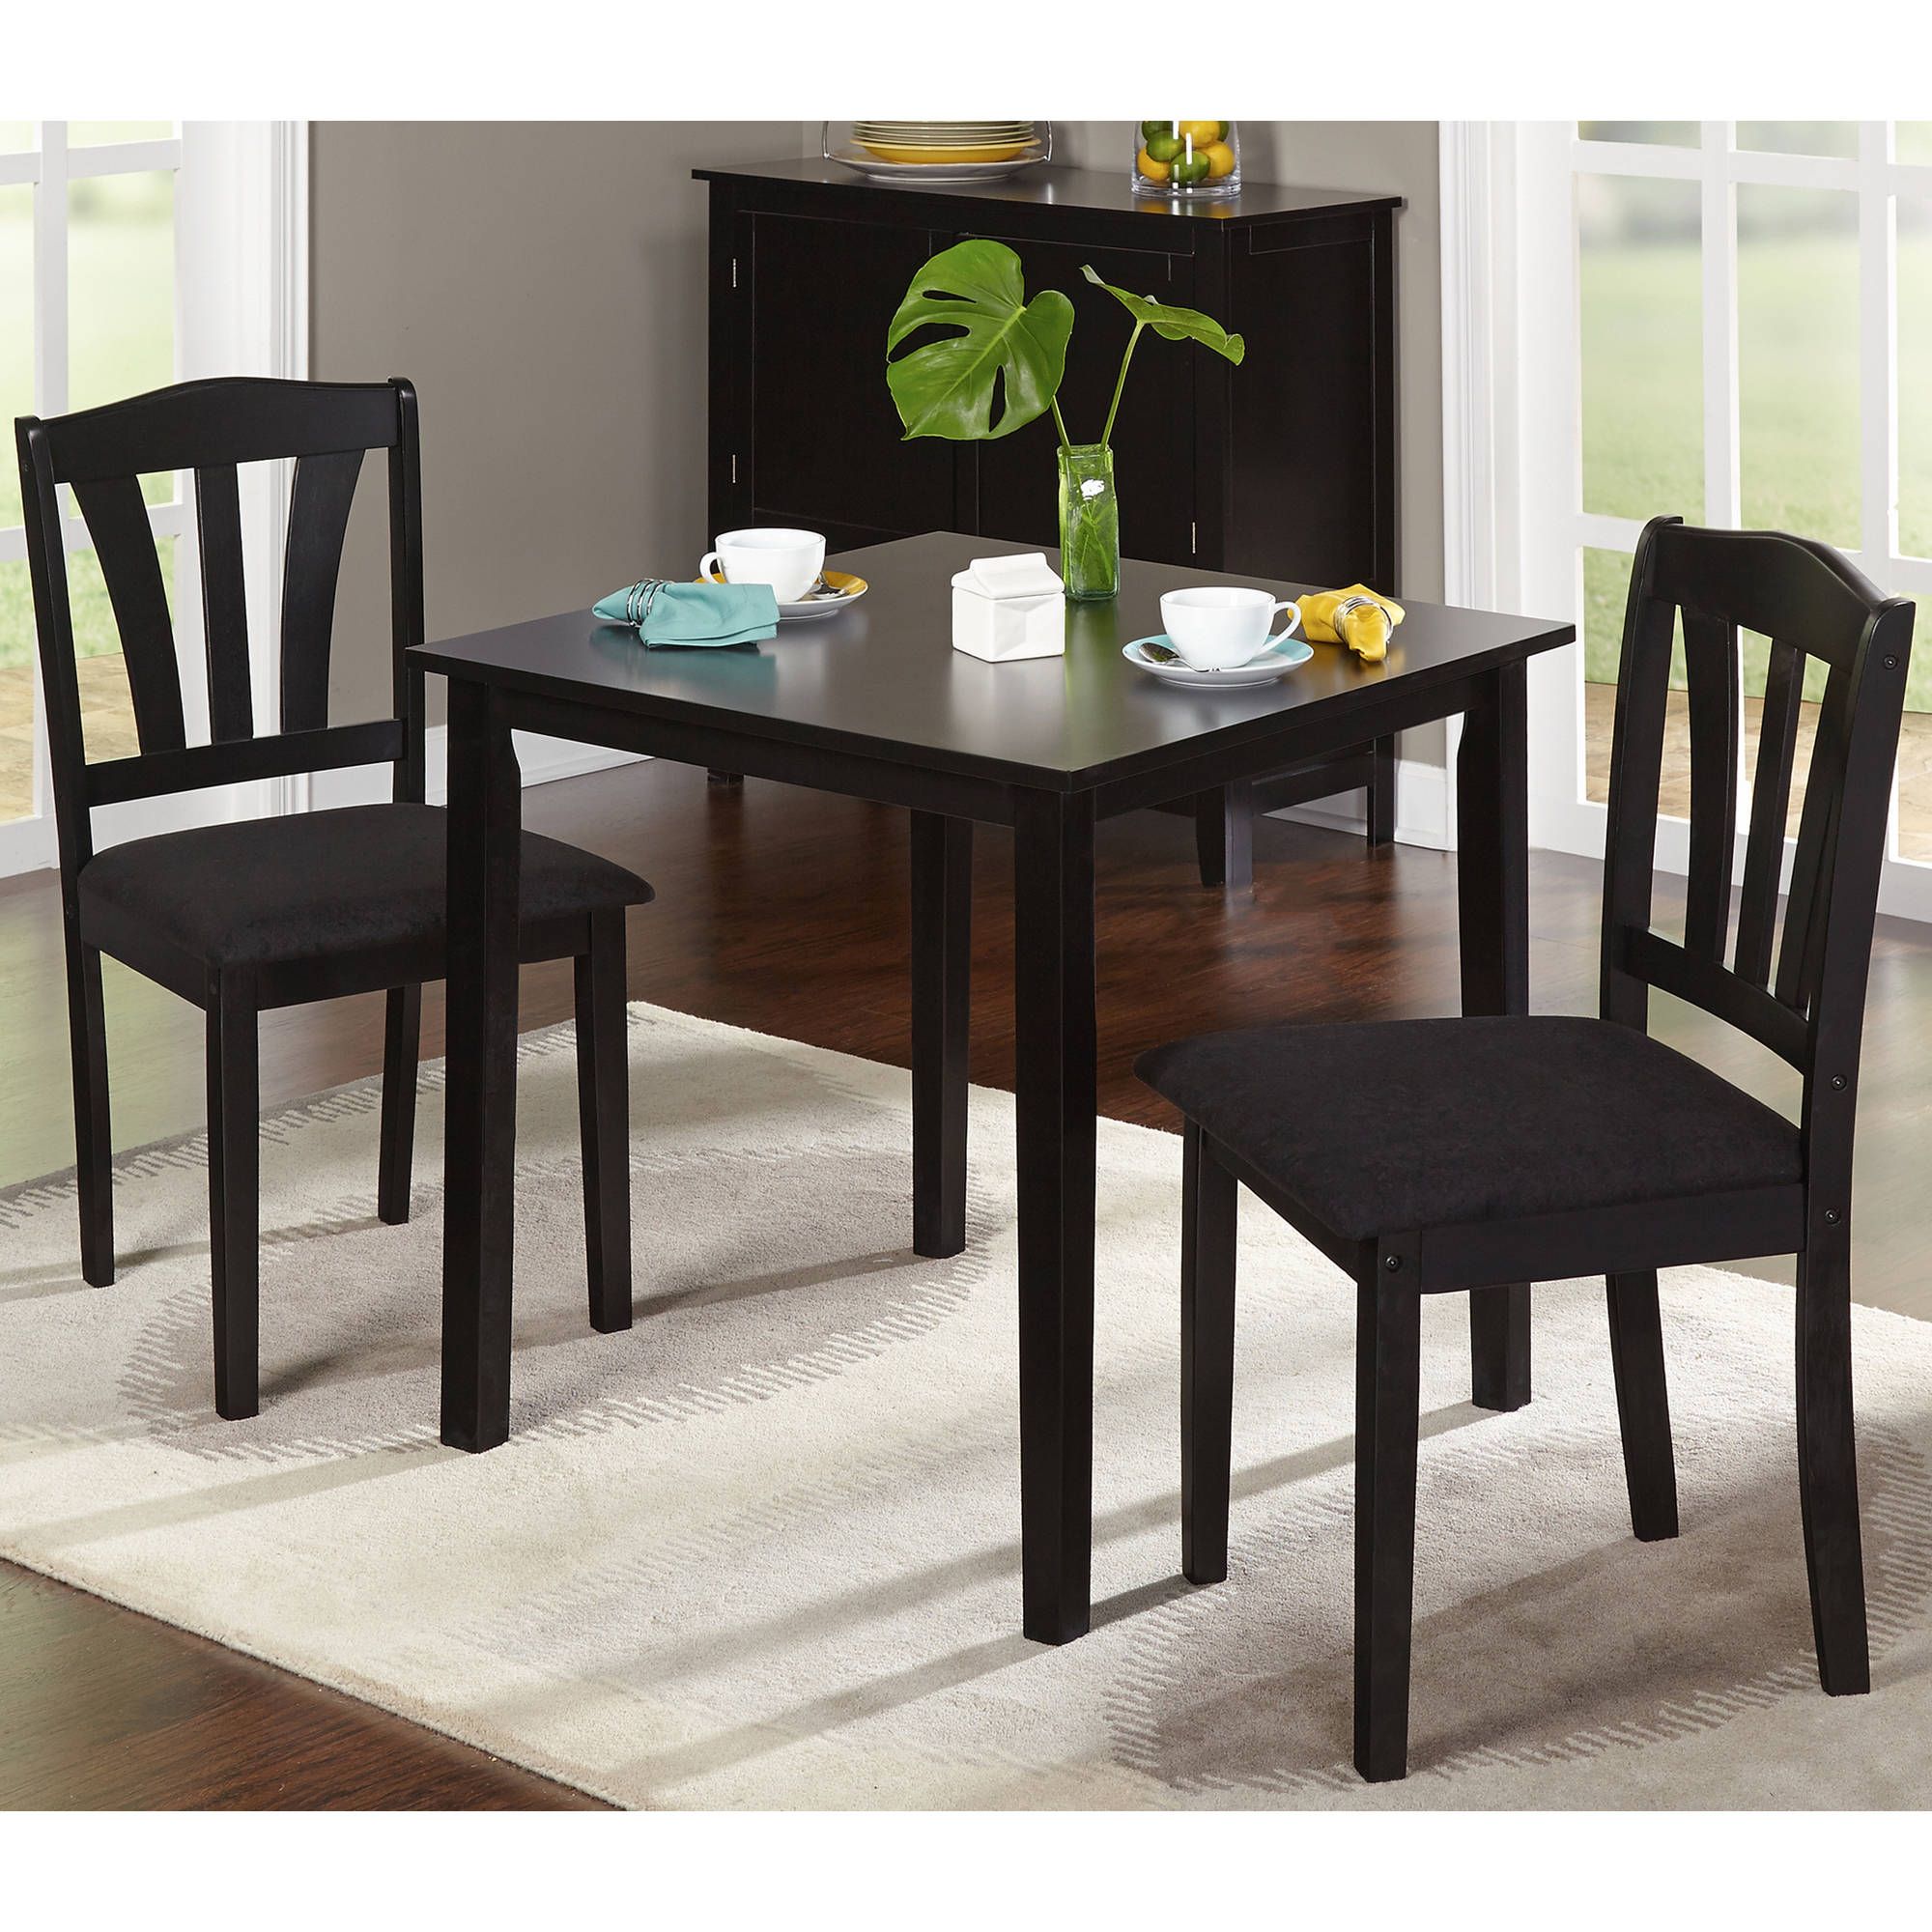 Metropolitan 3 Piece Dining Set, Multiple Finishes – Walmart For Best And Newest 3 Piece Breakfast Dining Sets (View 11 of 20)